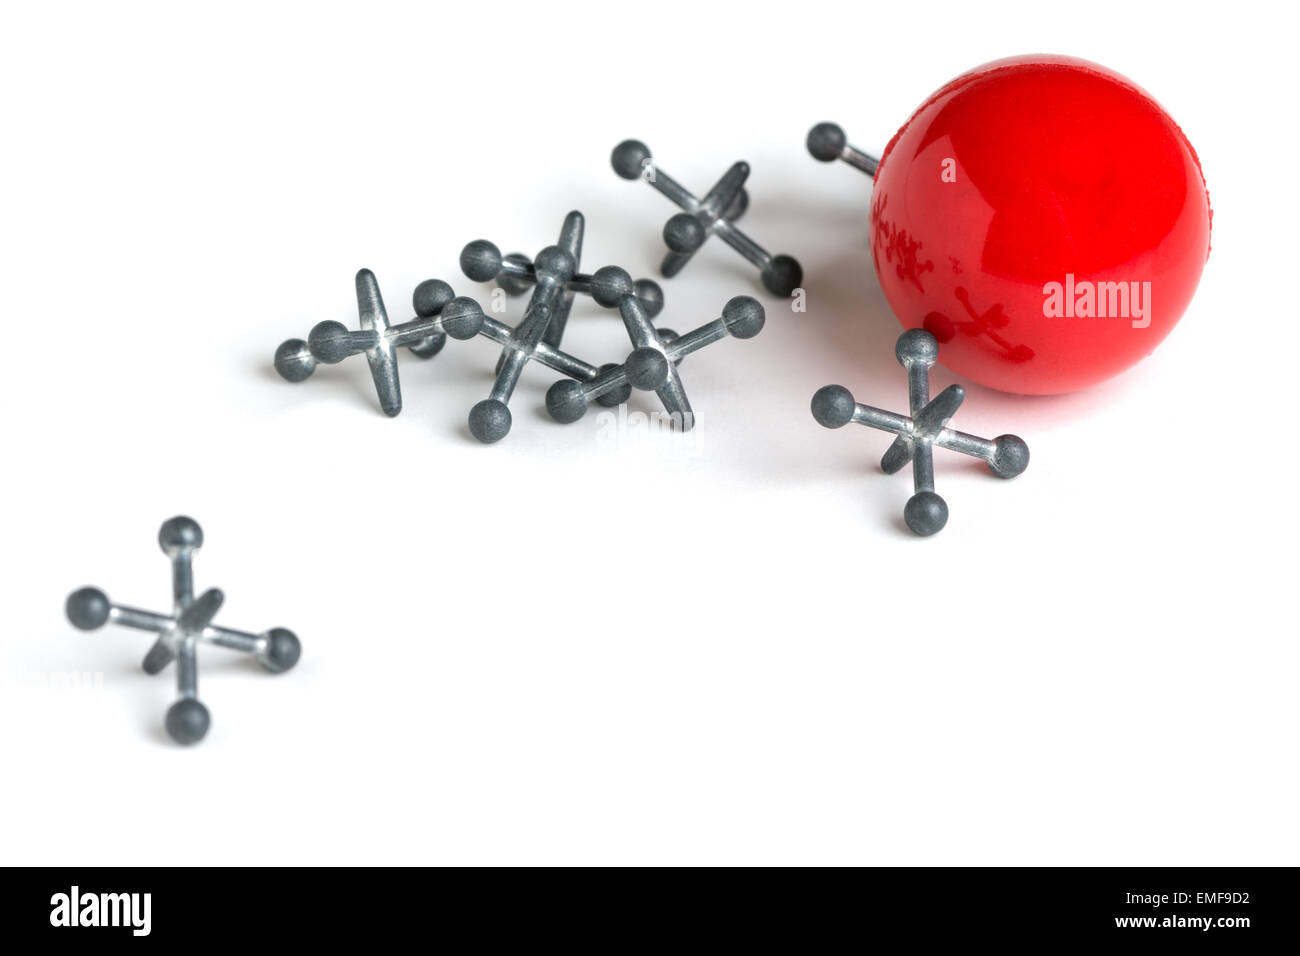 A set of metal jacks and a red rubber ball isolated on a white background. Stock Photo